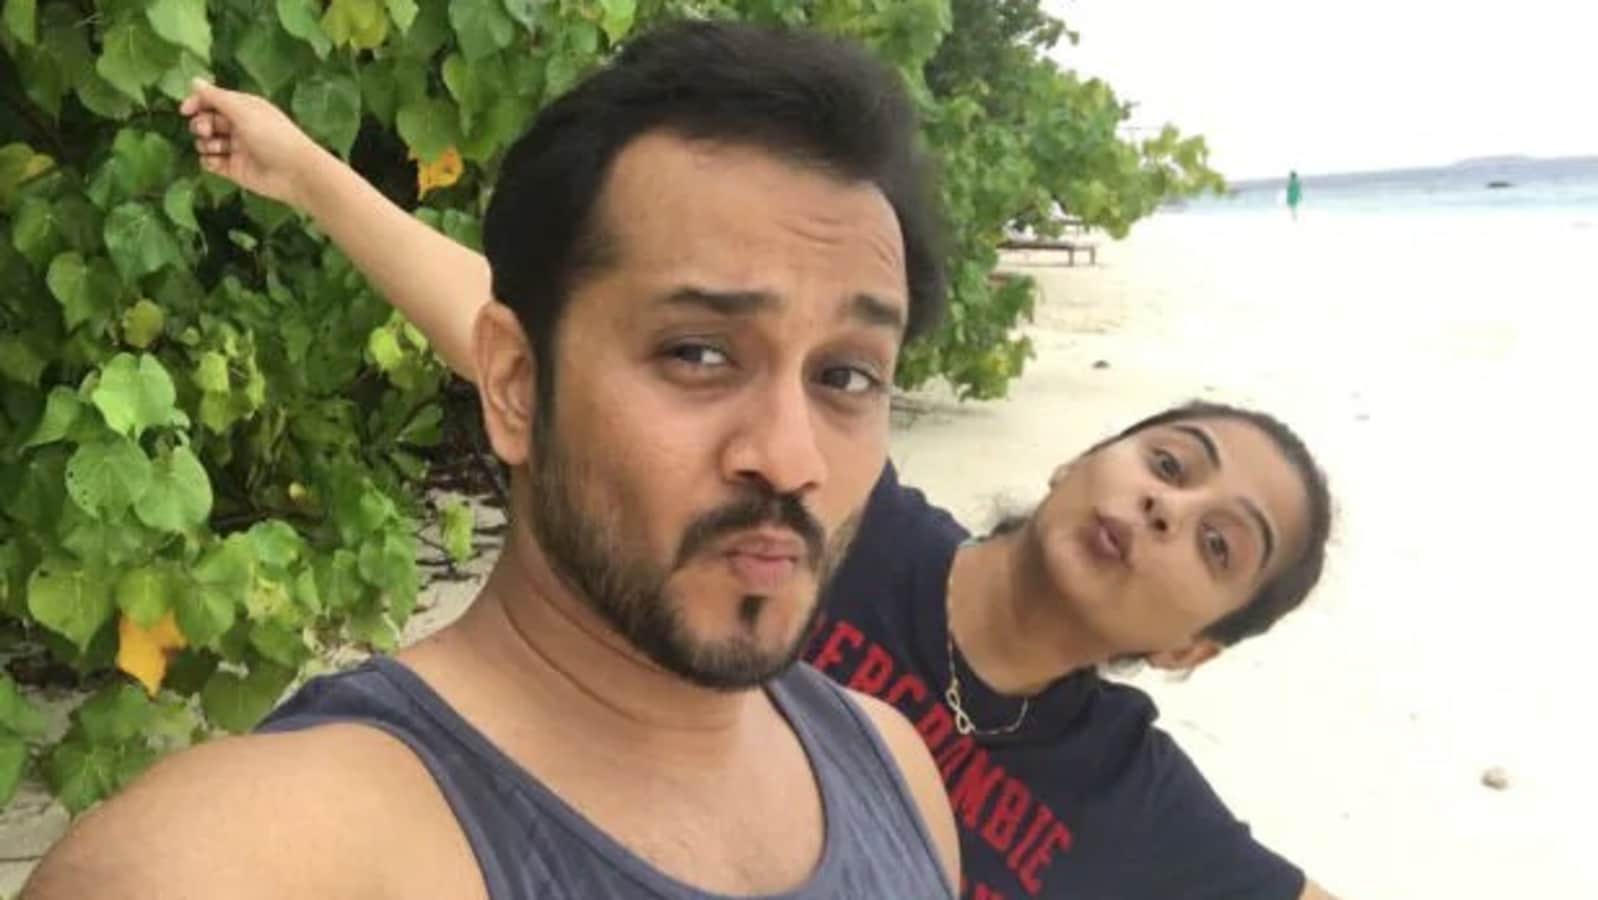 The Family Man actor Priyamani's marriage to Mustafa Raj is 'invalid', his first wife alleges | Bollywood - Hindustan Times